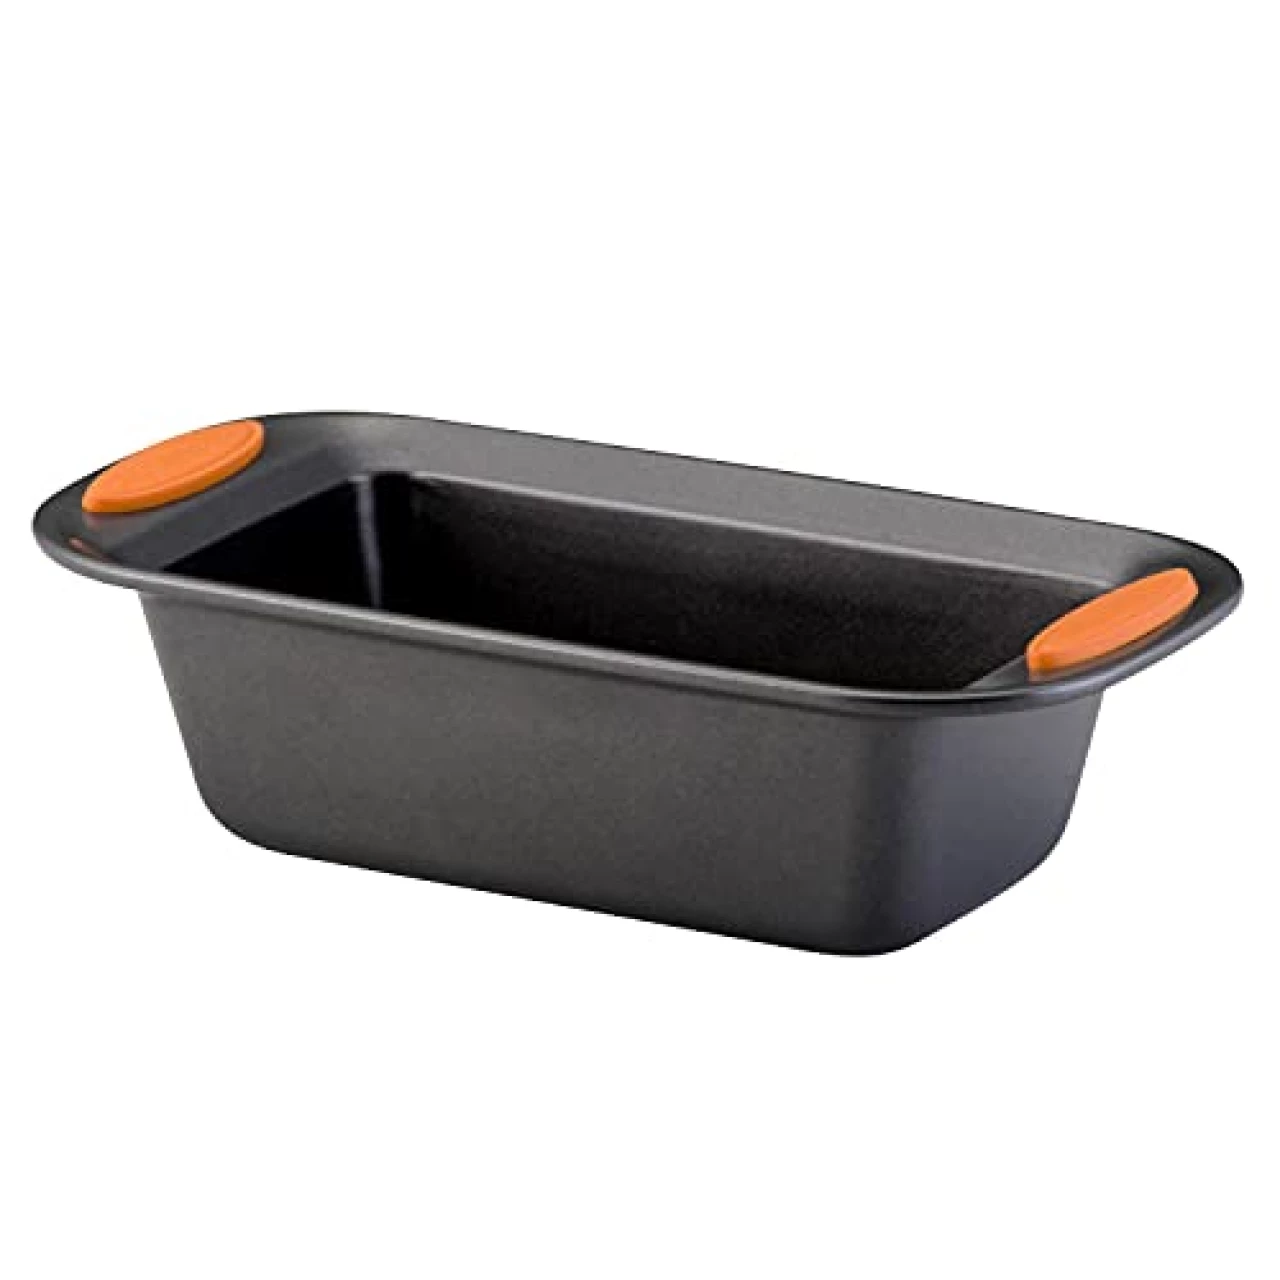 Rachael Ray Yum-o! Bakeware Oven Lovin&rsquo; Nonstick Loaf Pan, 9-Inch by 5-Inch Steel Pan, Gray with Orange Handles